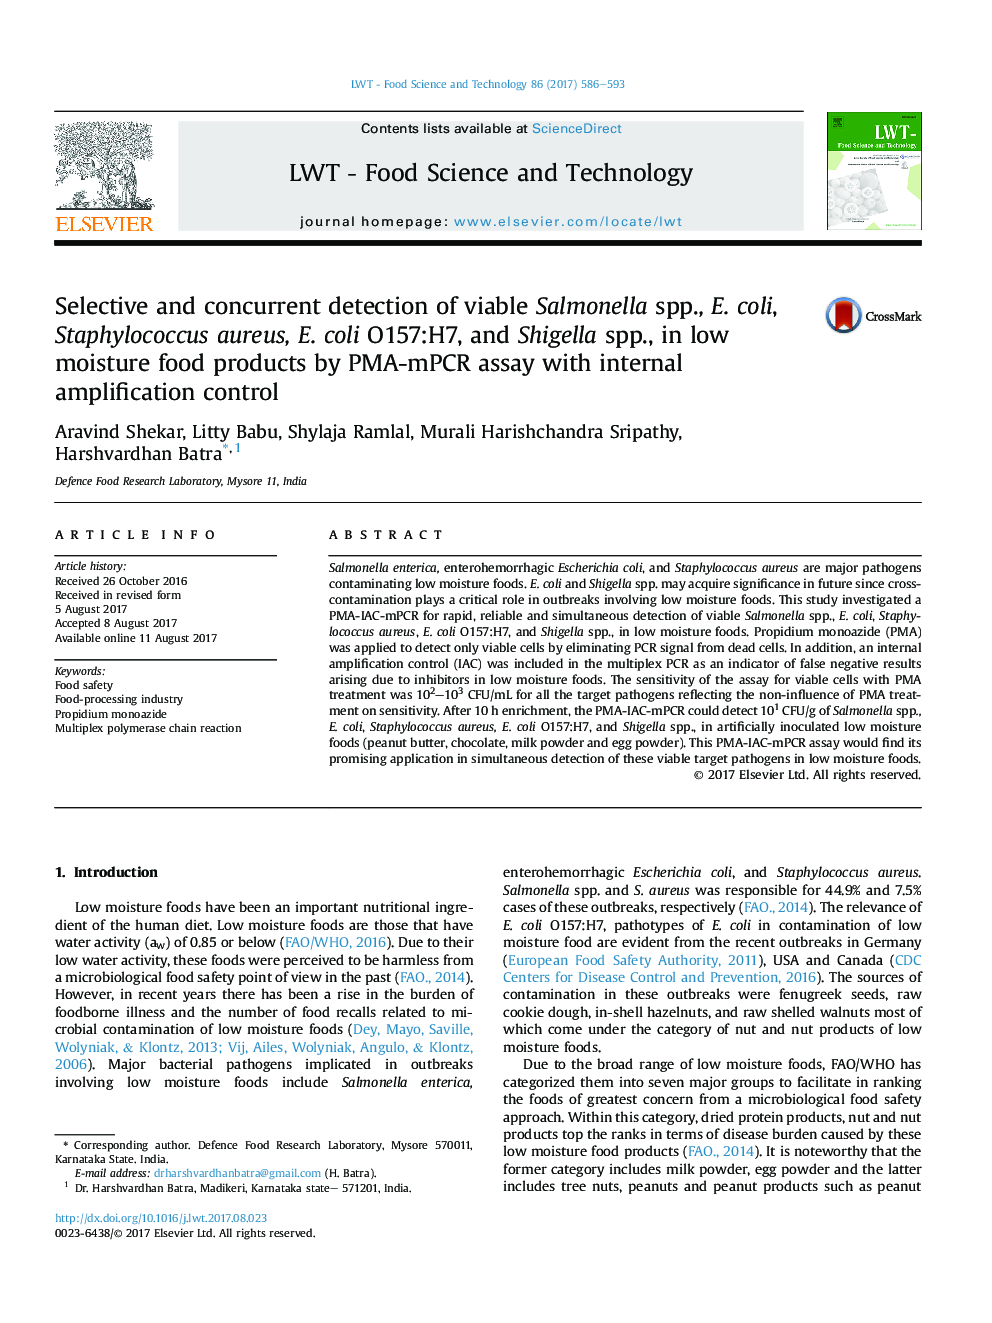 Selective and concurrent detection of viable Salmonella spp., E. coli, Staphylococcus aureus, E. coli O157:H7, and Shigella spp., in low moisture food products by PMA-mPCR assay with internal amplification control